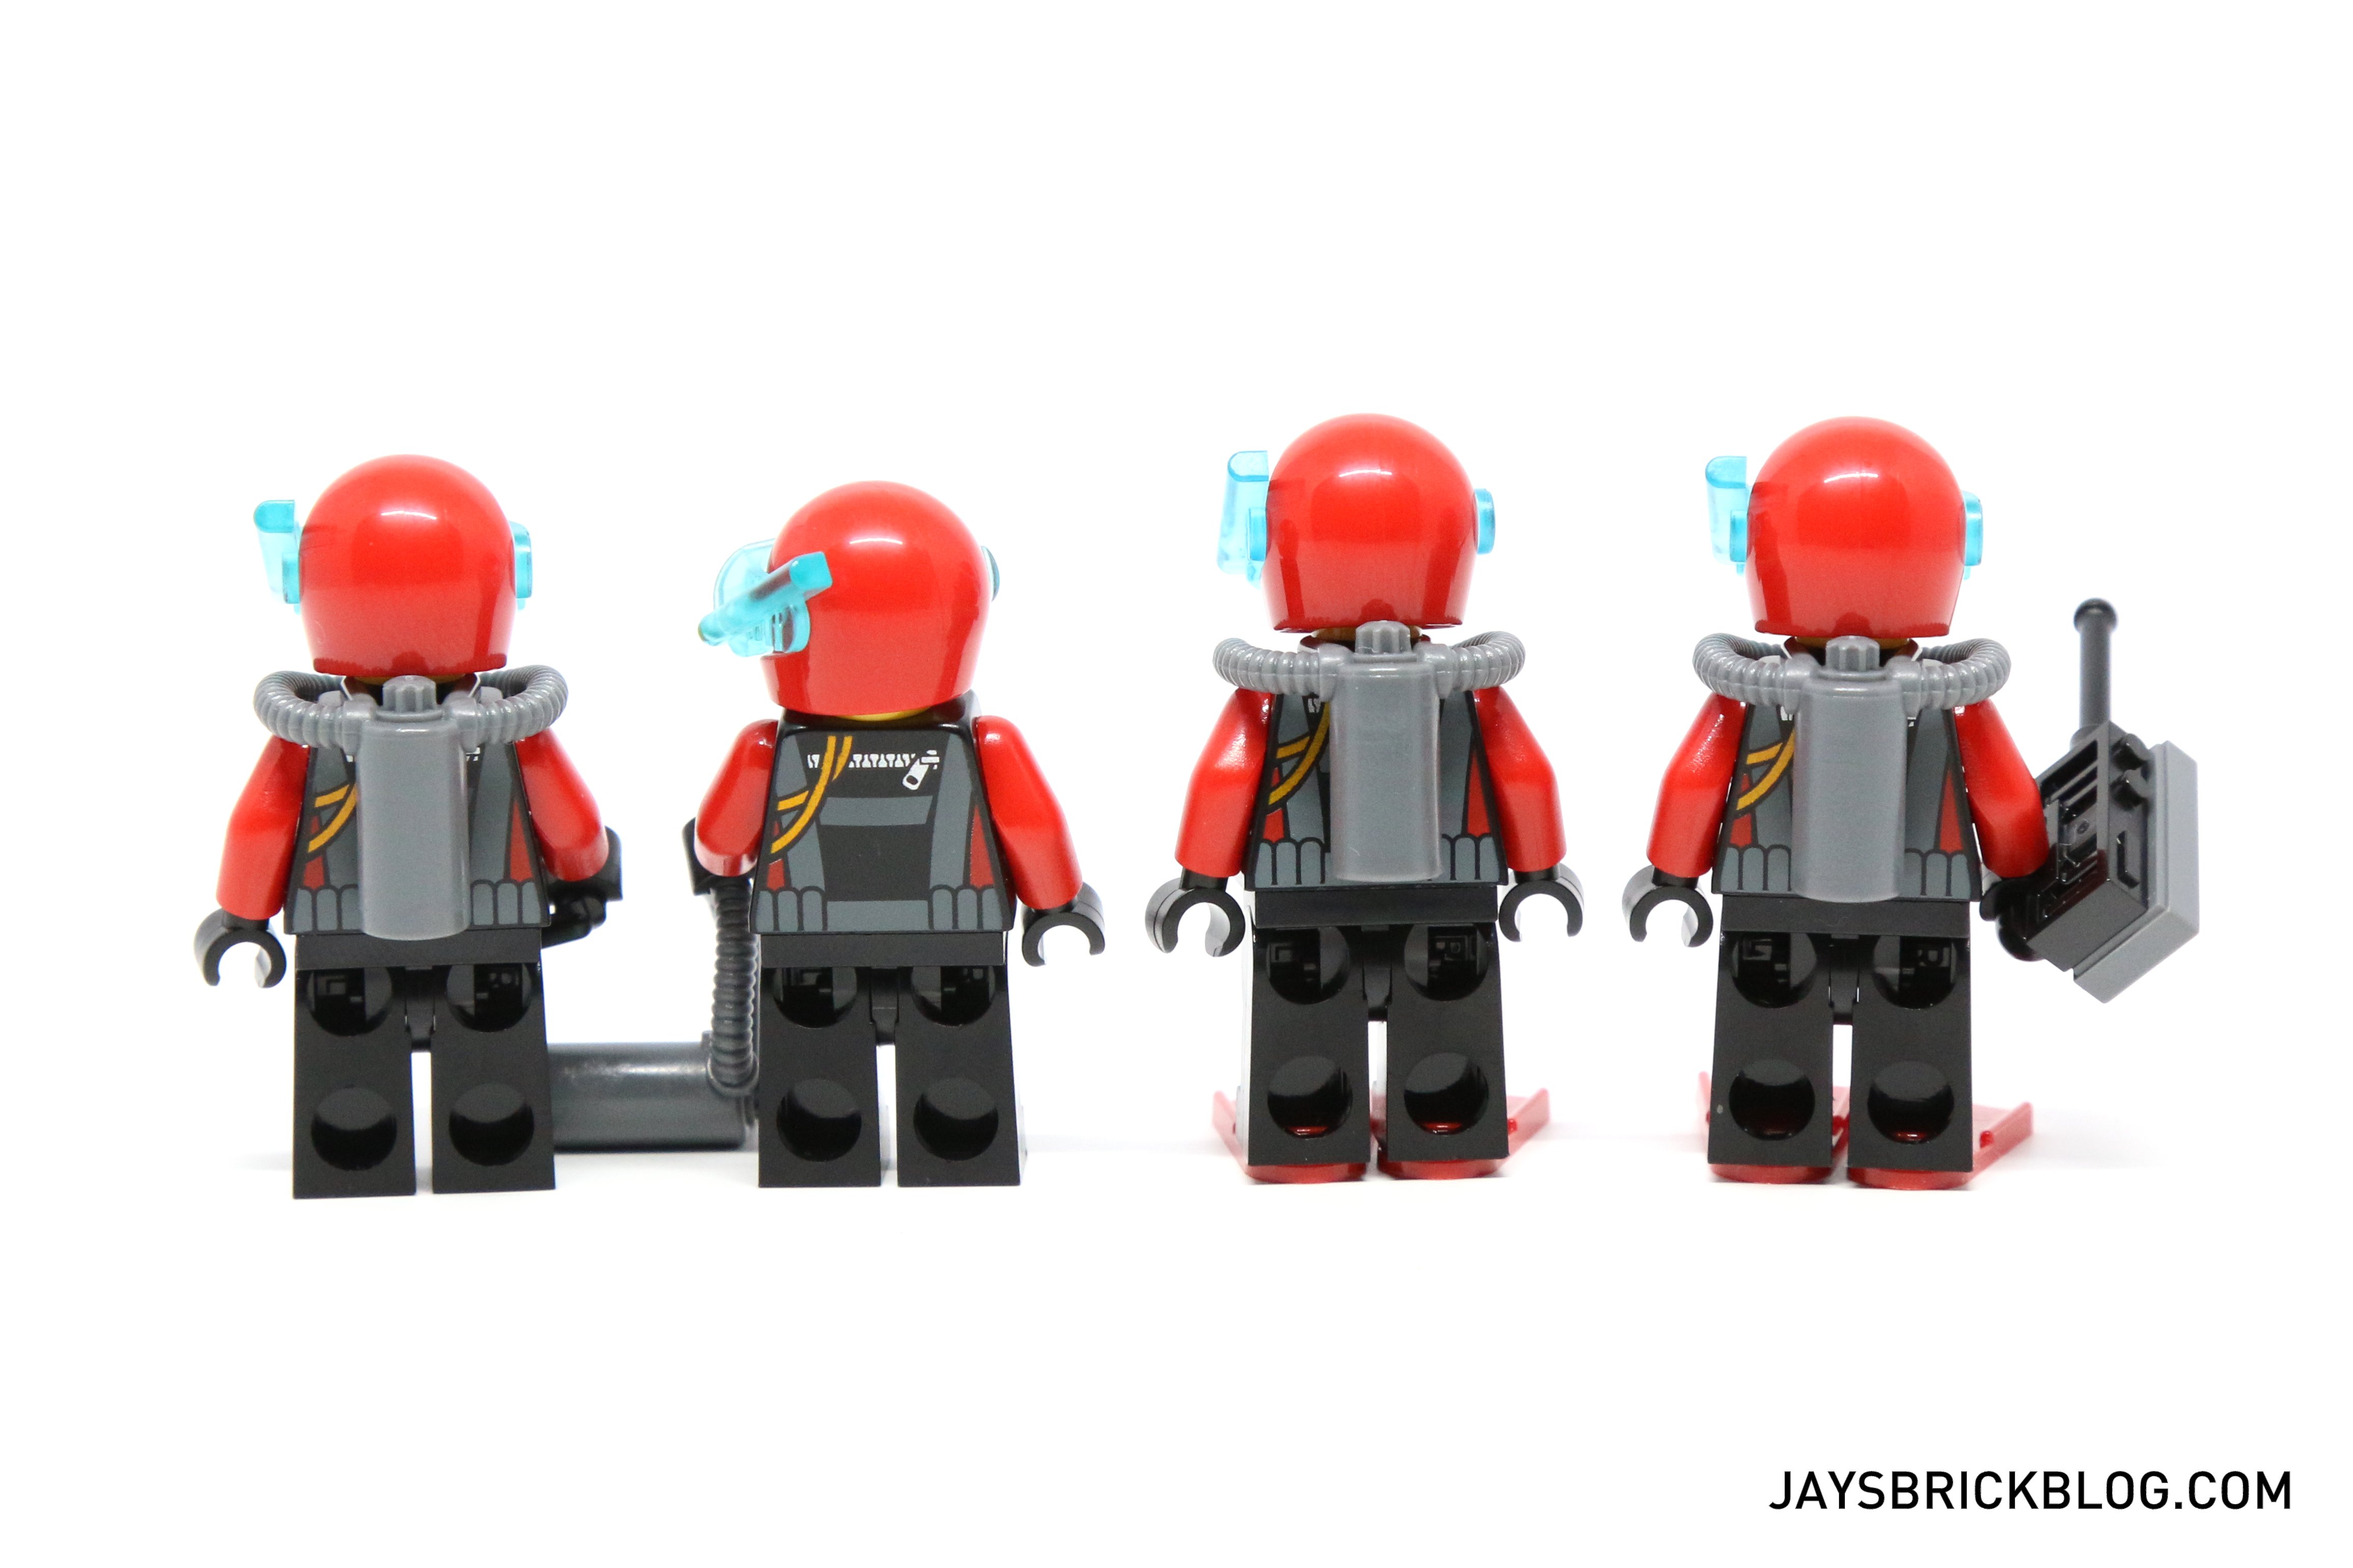 LEGO Male Artic Explorer MINIFIGURE Red Jacket And Red Fur Hat